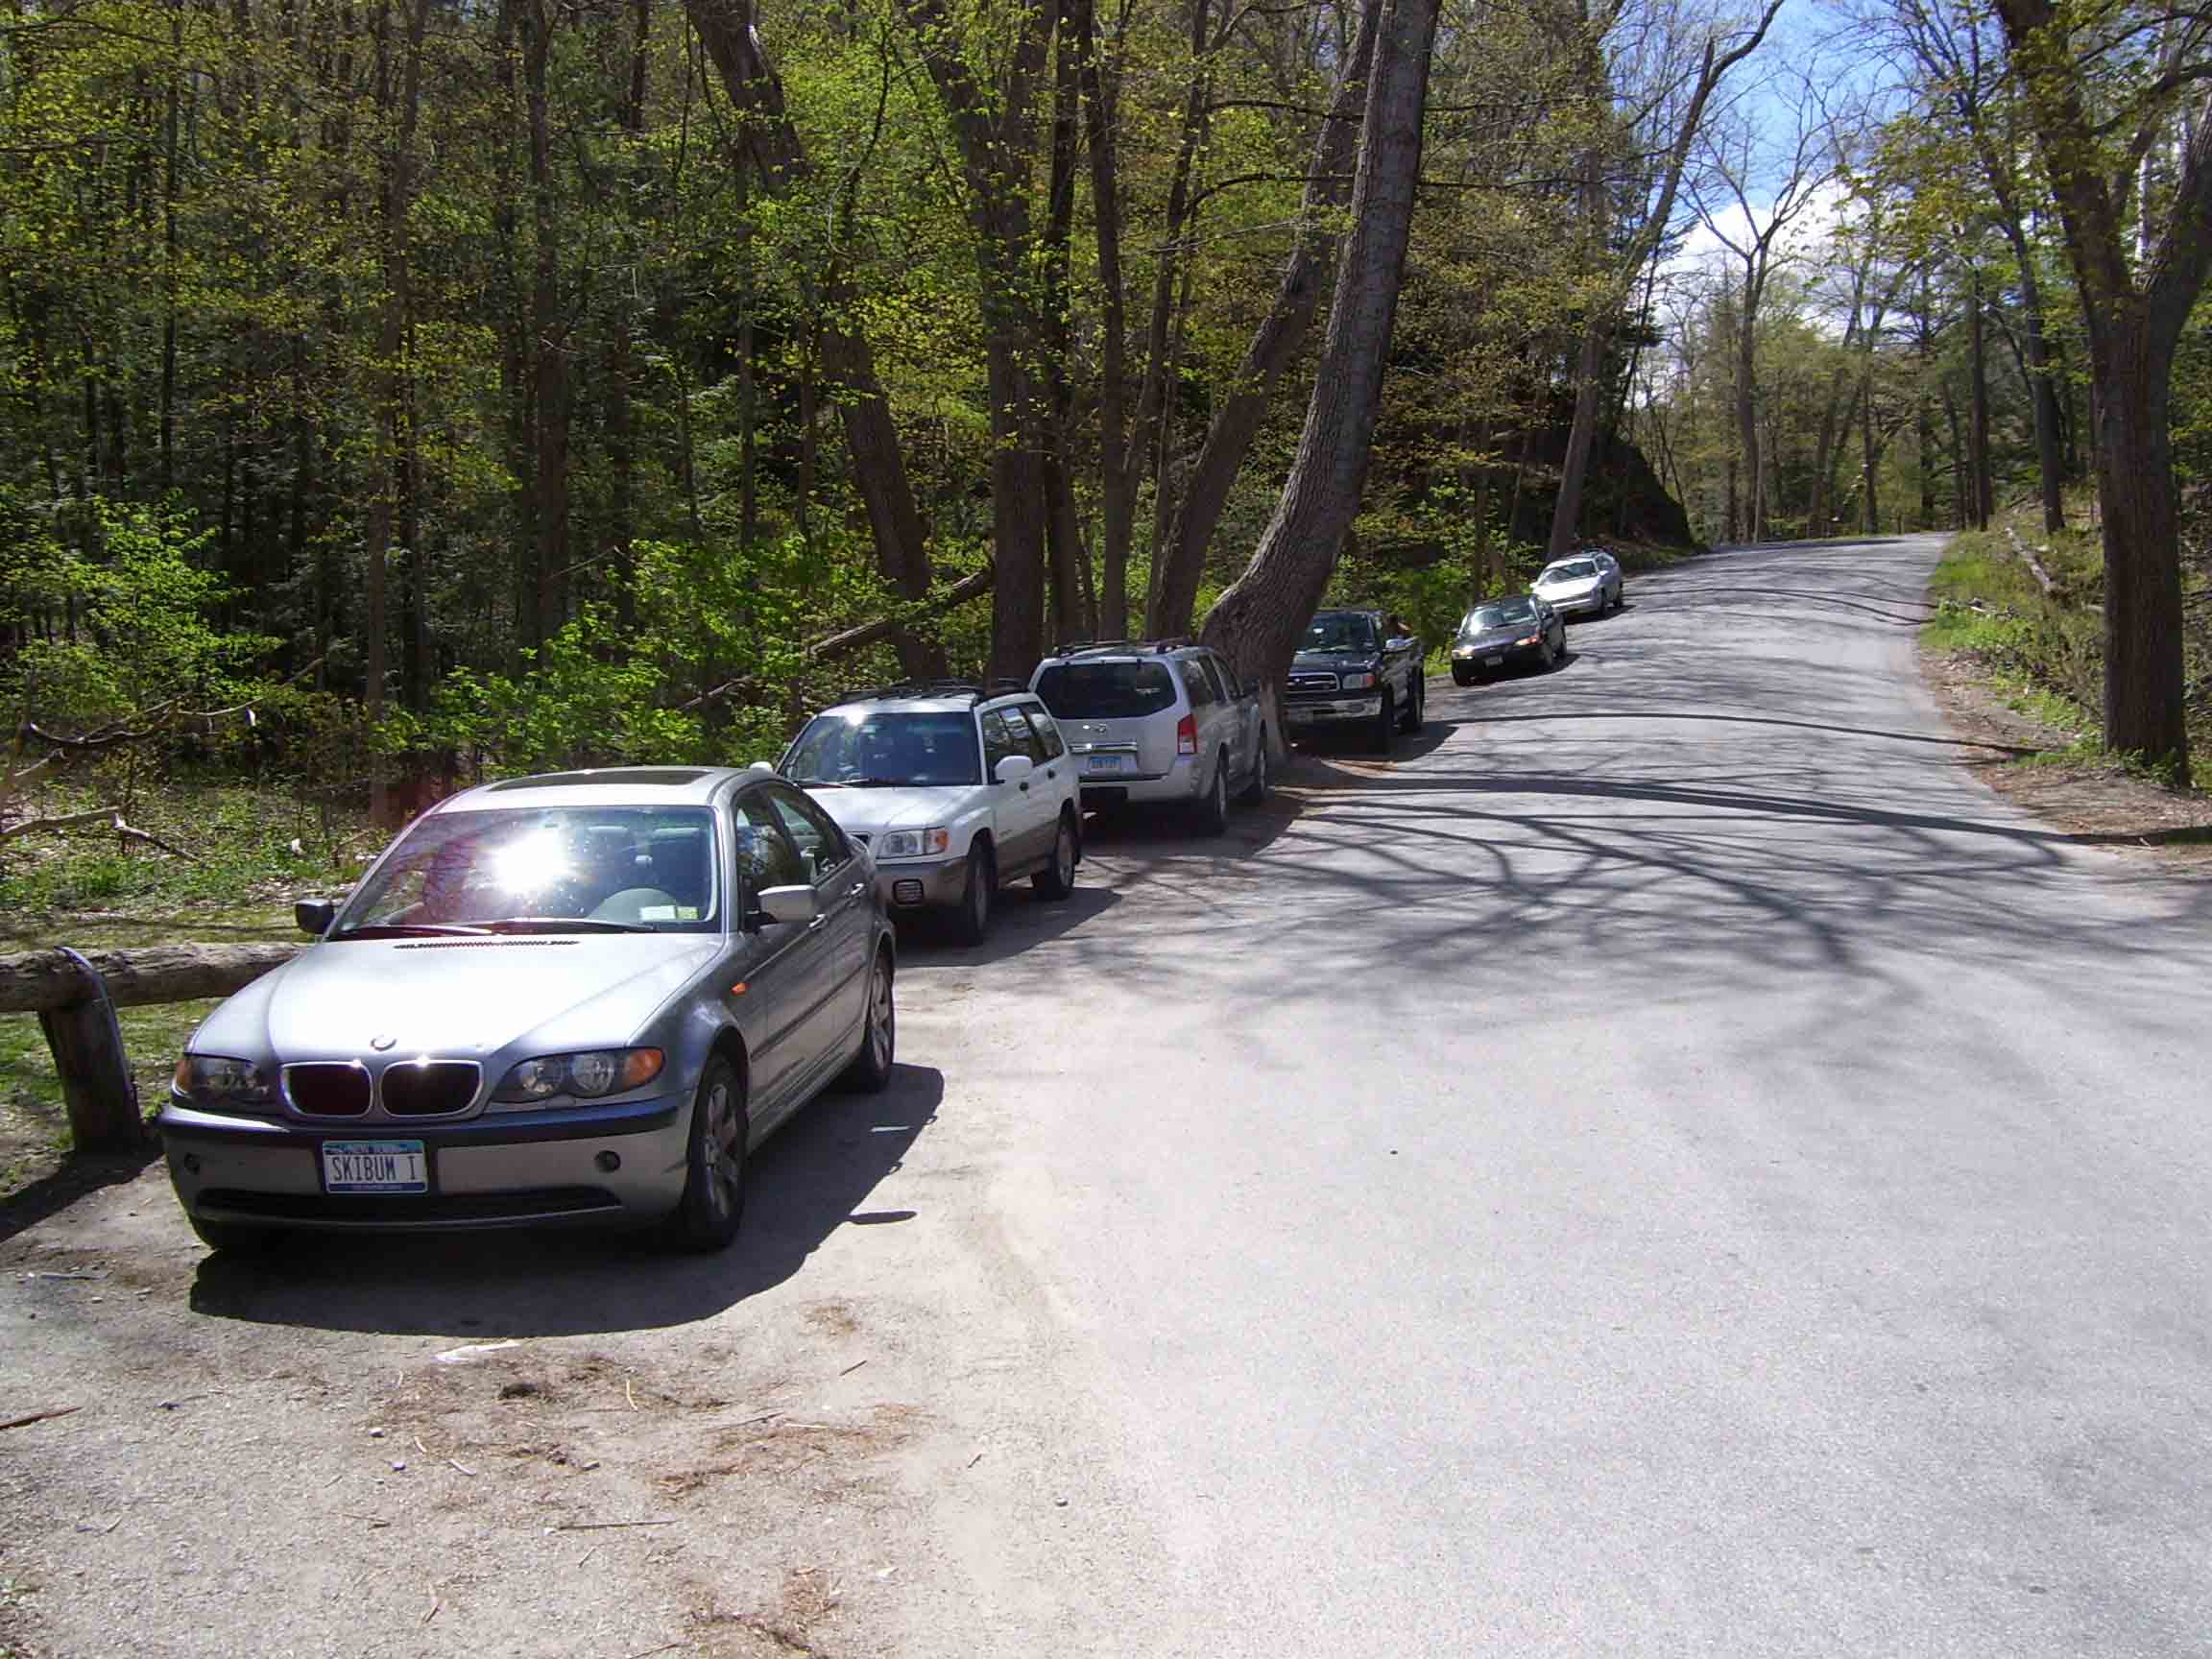 Roadside parking along Bulls Bridge Road. Formerly the trail came in from the left, went along Bulls Bridge Road to the junction of Schagiticoke Road. The new trail goes over a hill to the junction. The former AT route is now a blue-blazed route which meets the AT at MM 7.9  Alternatively the road may be followed over the rise in picture to meet AT at MM 7.4. Update (2013): Because of overuse of the sort seen in this photo, roadside parking is prohibited along Bulls Bridge Road from US 7 to the junction with Schaghticoke Road.  Courtesy dlcul@conncoll.edu